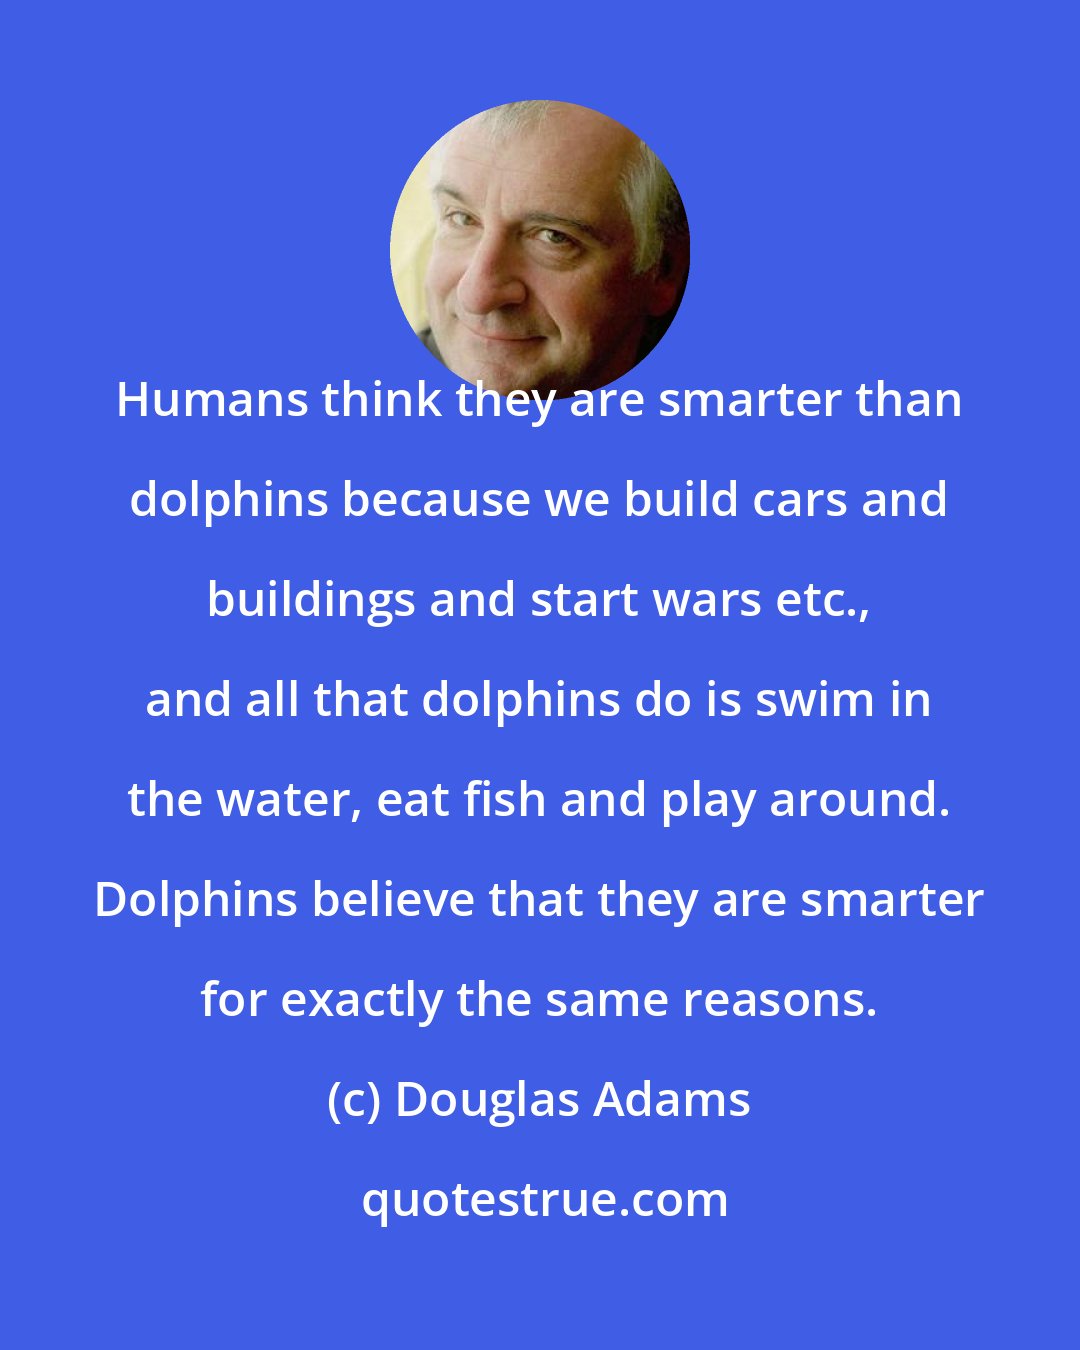 Douglas Adams: Humans think they are smarter than dolphins because we build cars and buildings and start wars etc., and all that dolphins do is swim in the water, eat fish and play around. Dolphins believe that they are smarter for exactly the same reasons.